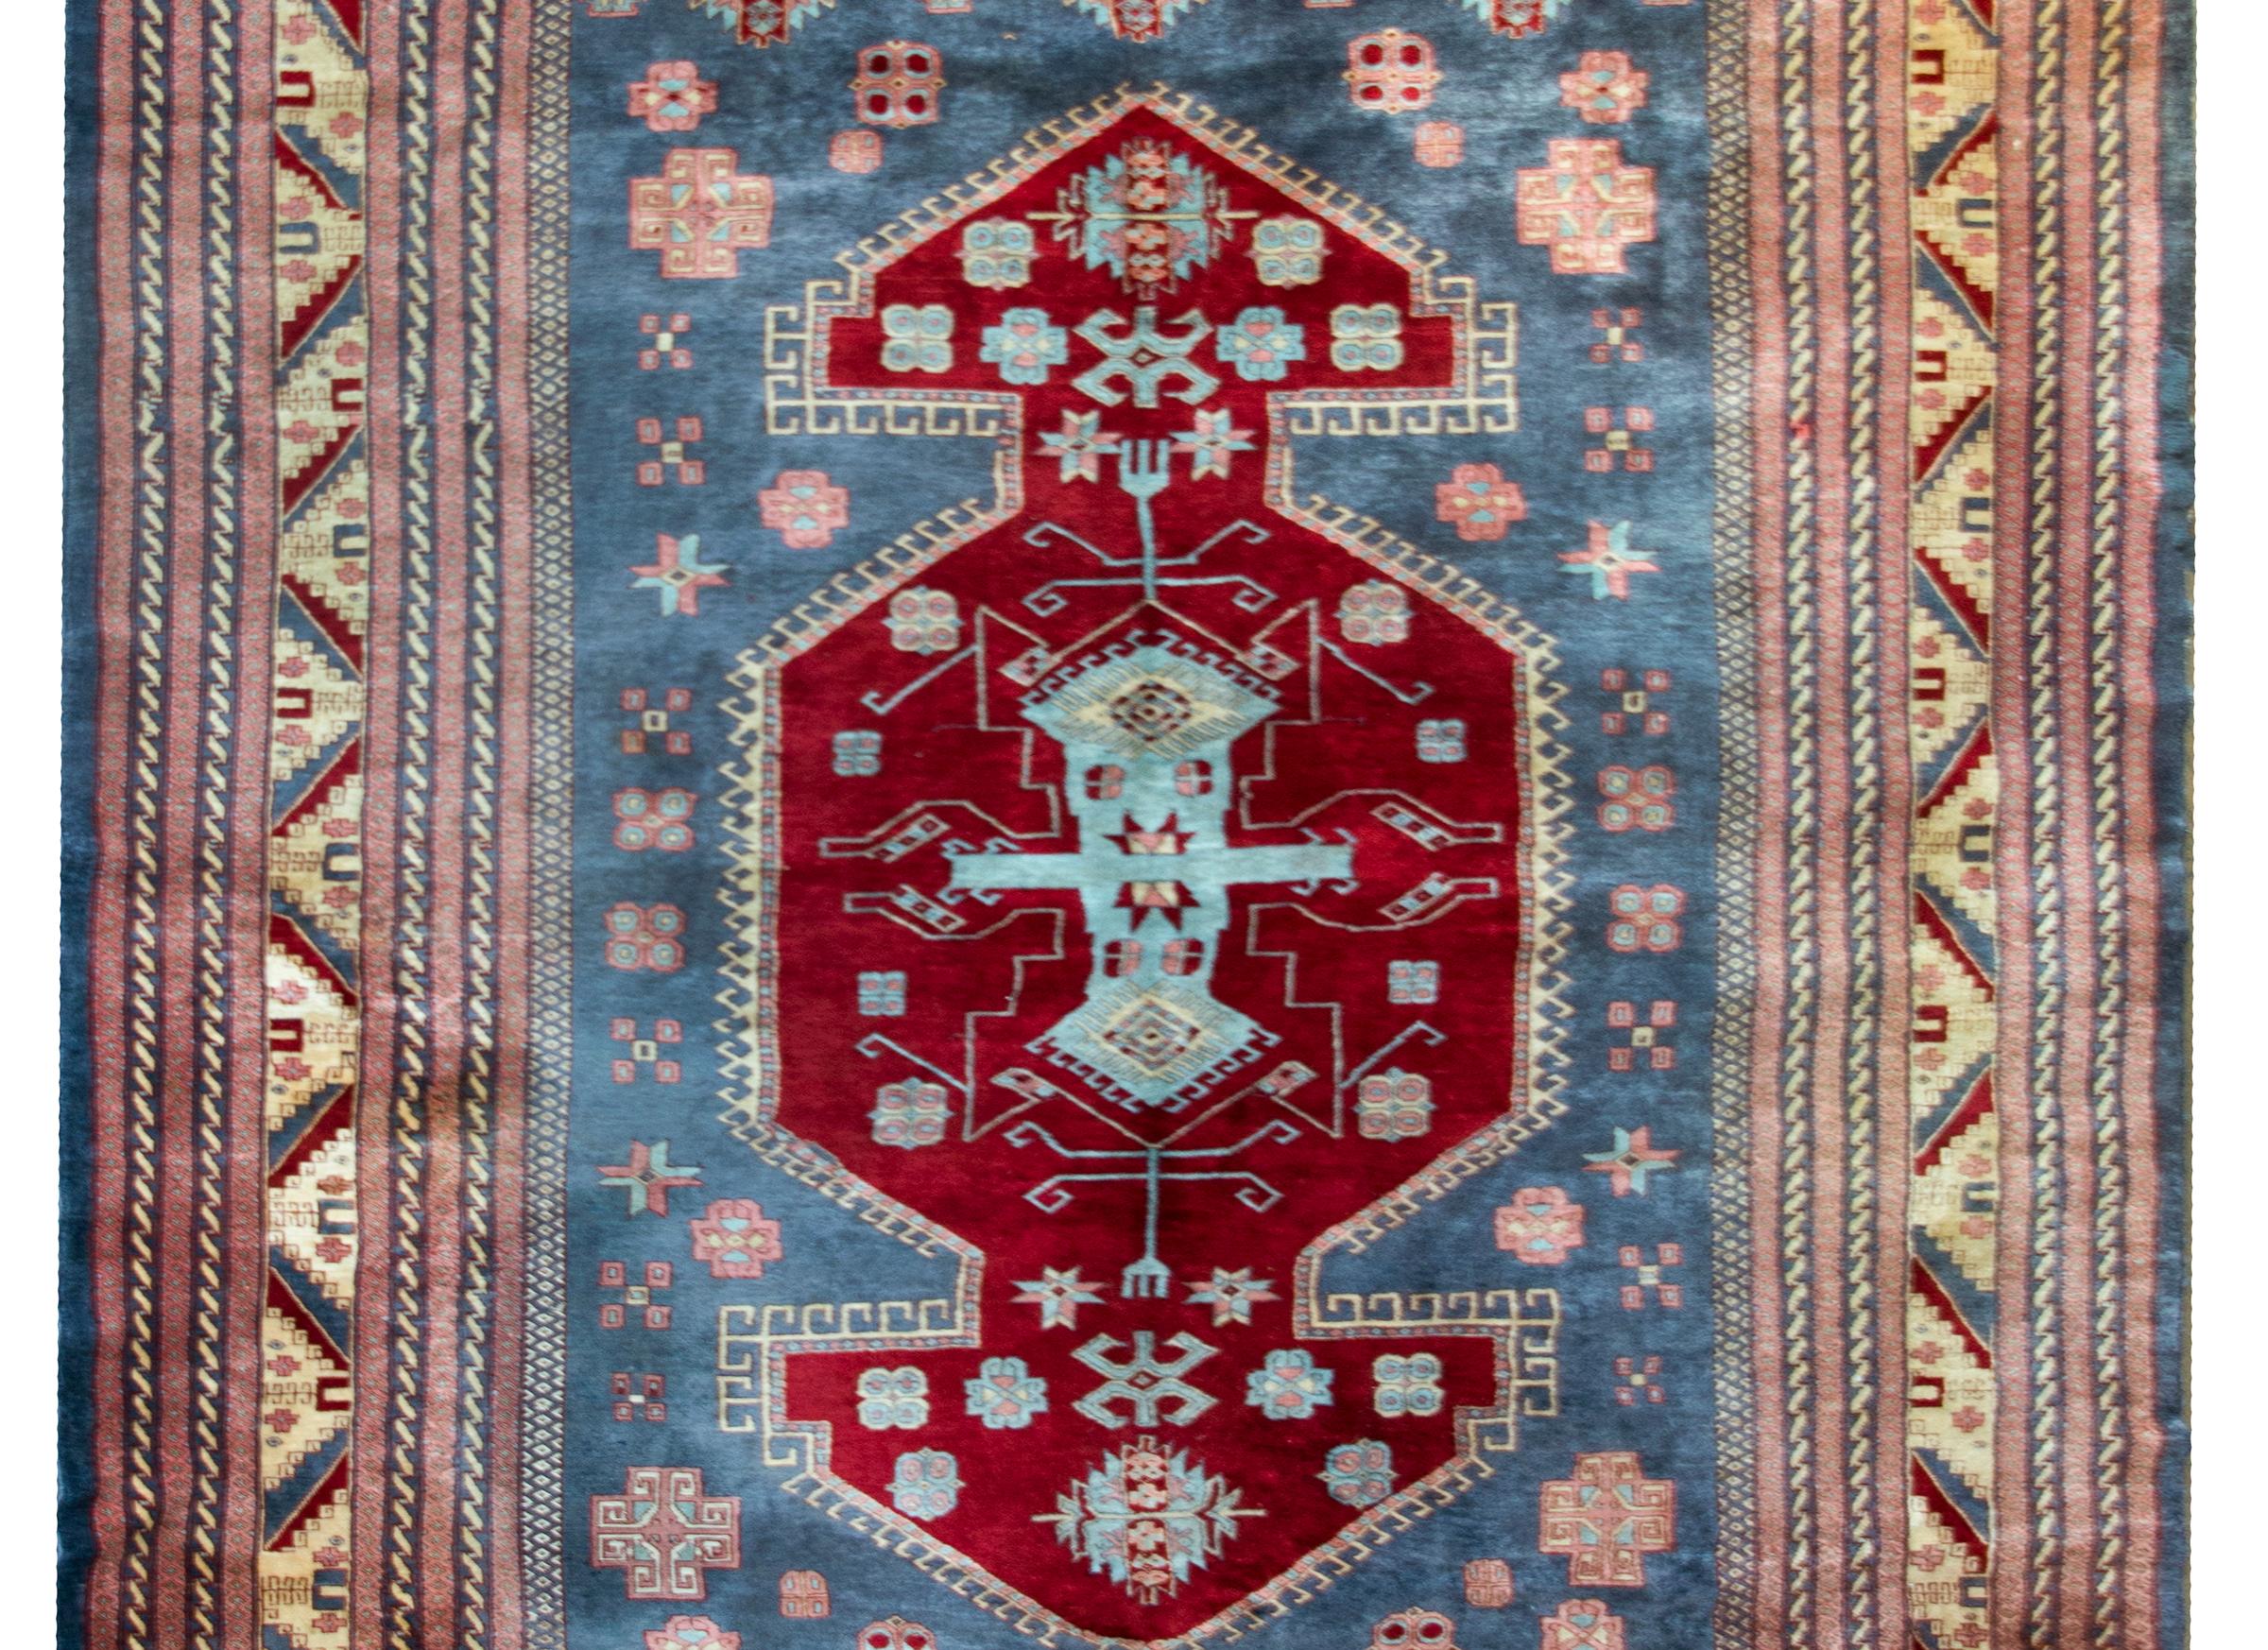 A wonderful mid-20th century Pakistani Bokhara rug with a large central medallion living amidst a field of stylized flowers all woven in pink, cranberry, and light indigo, and all surrounded by a complex border containing various petite geometric